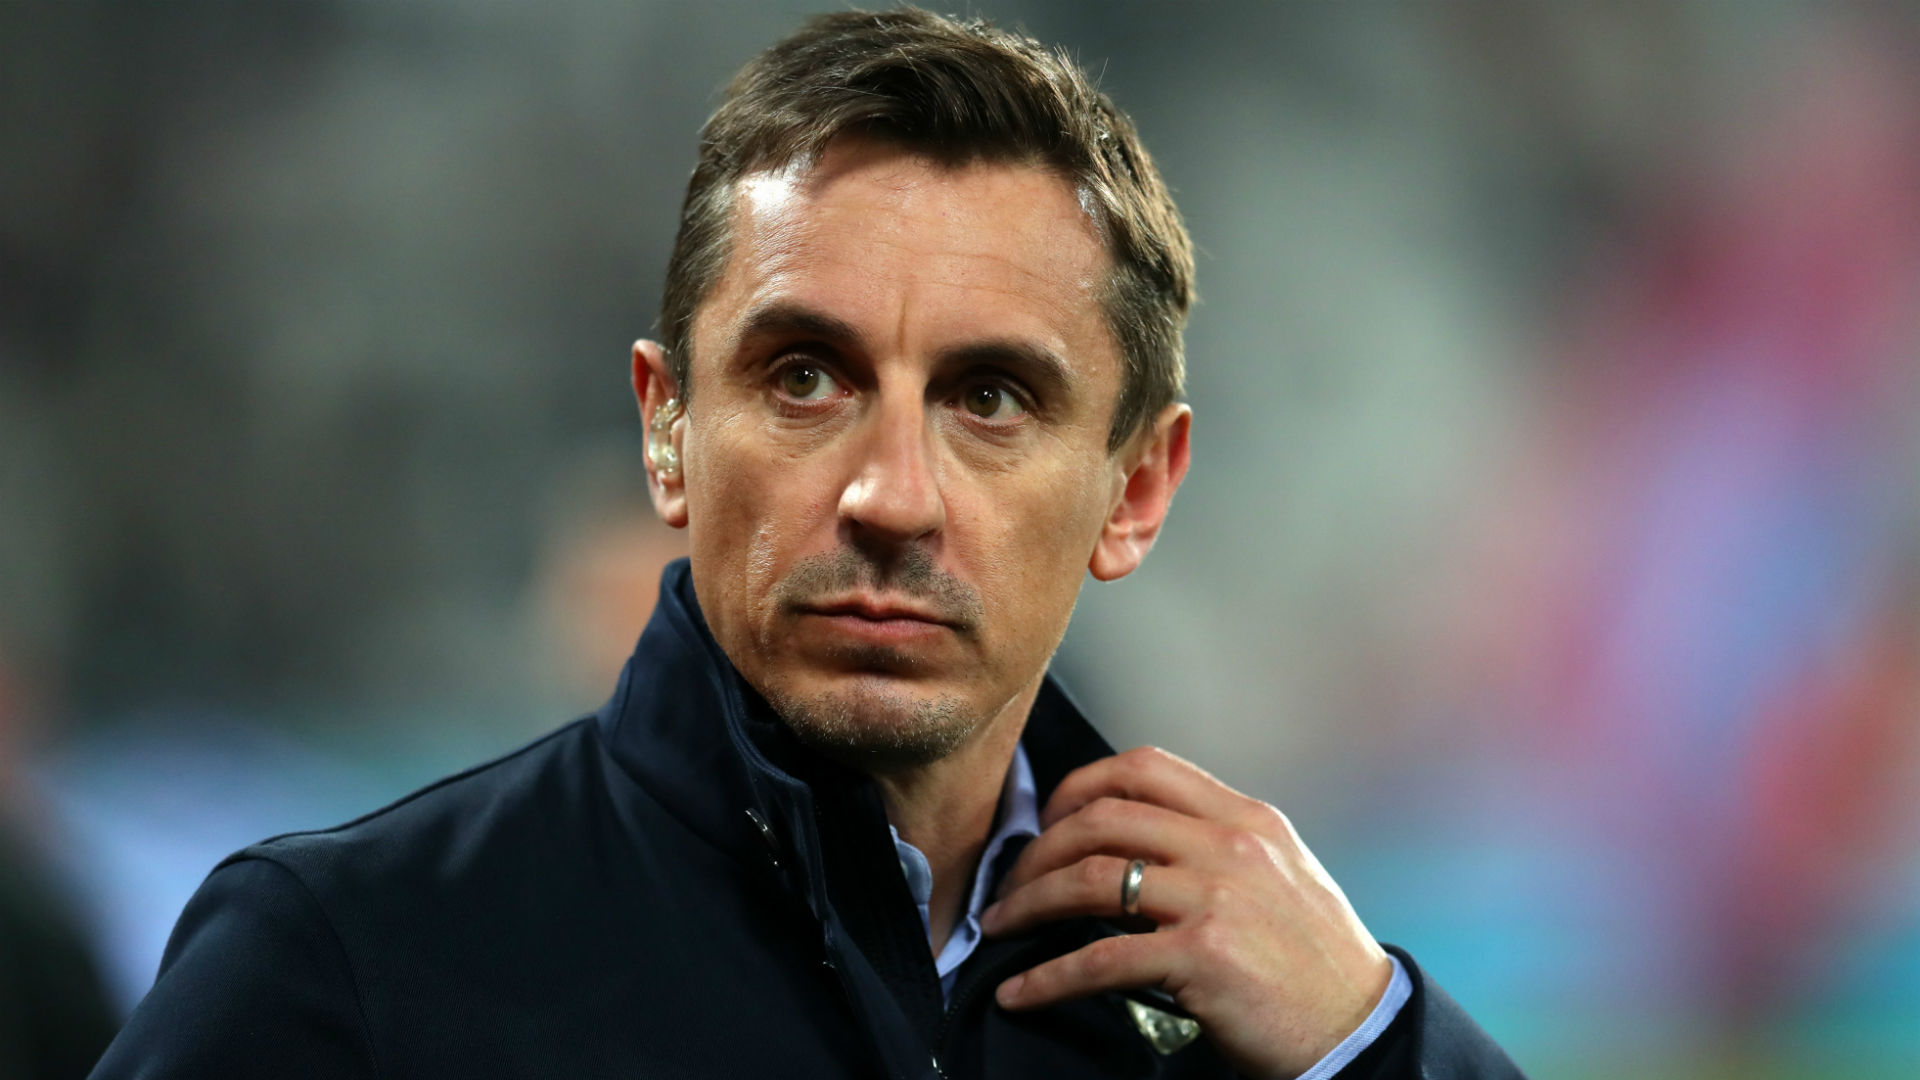 Gary Neville says he has no interest in pursuing another coaching role and wants to focus on punditry and his business interests.